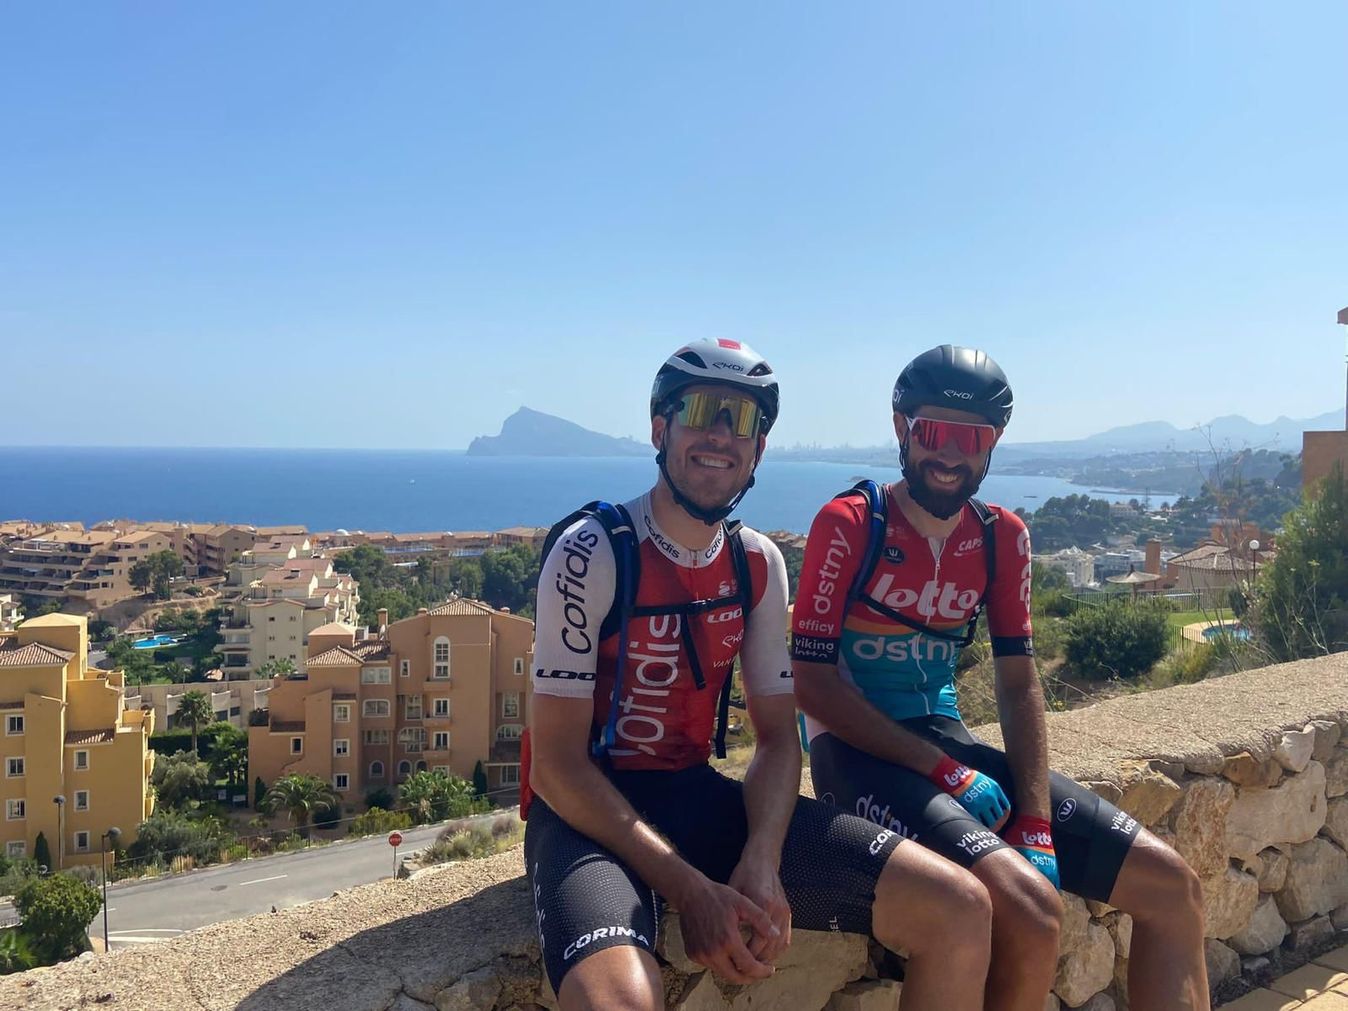 Wallays and De Gendt with the final destination of Calpe in the background